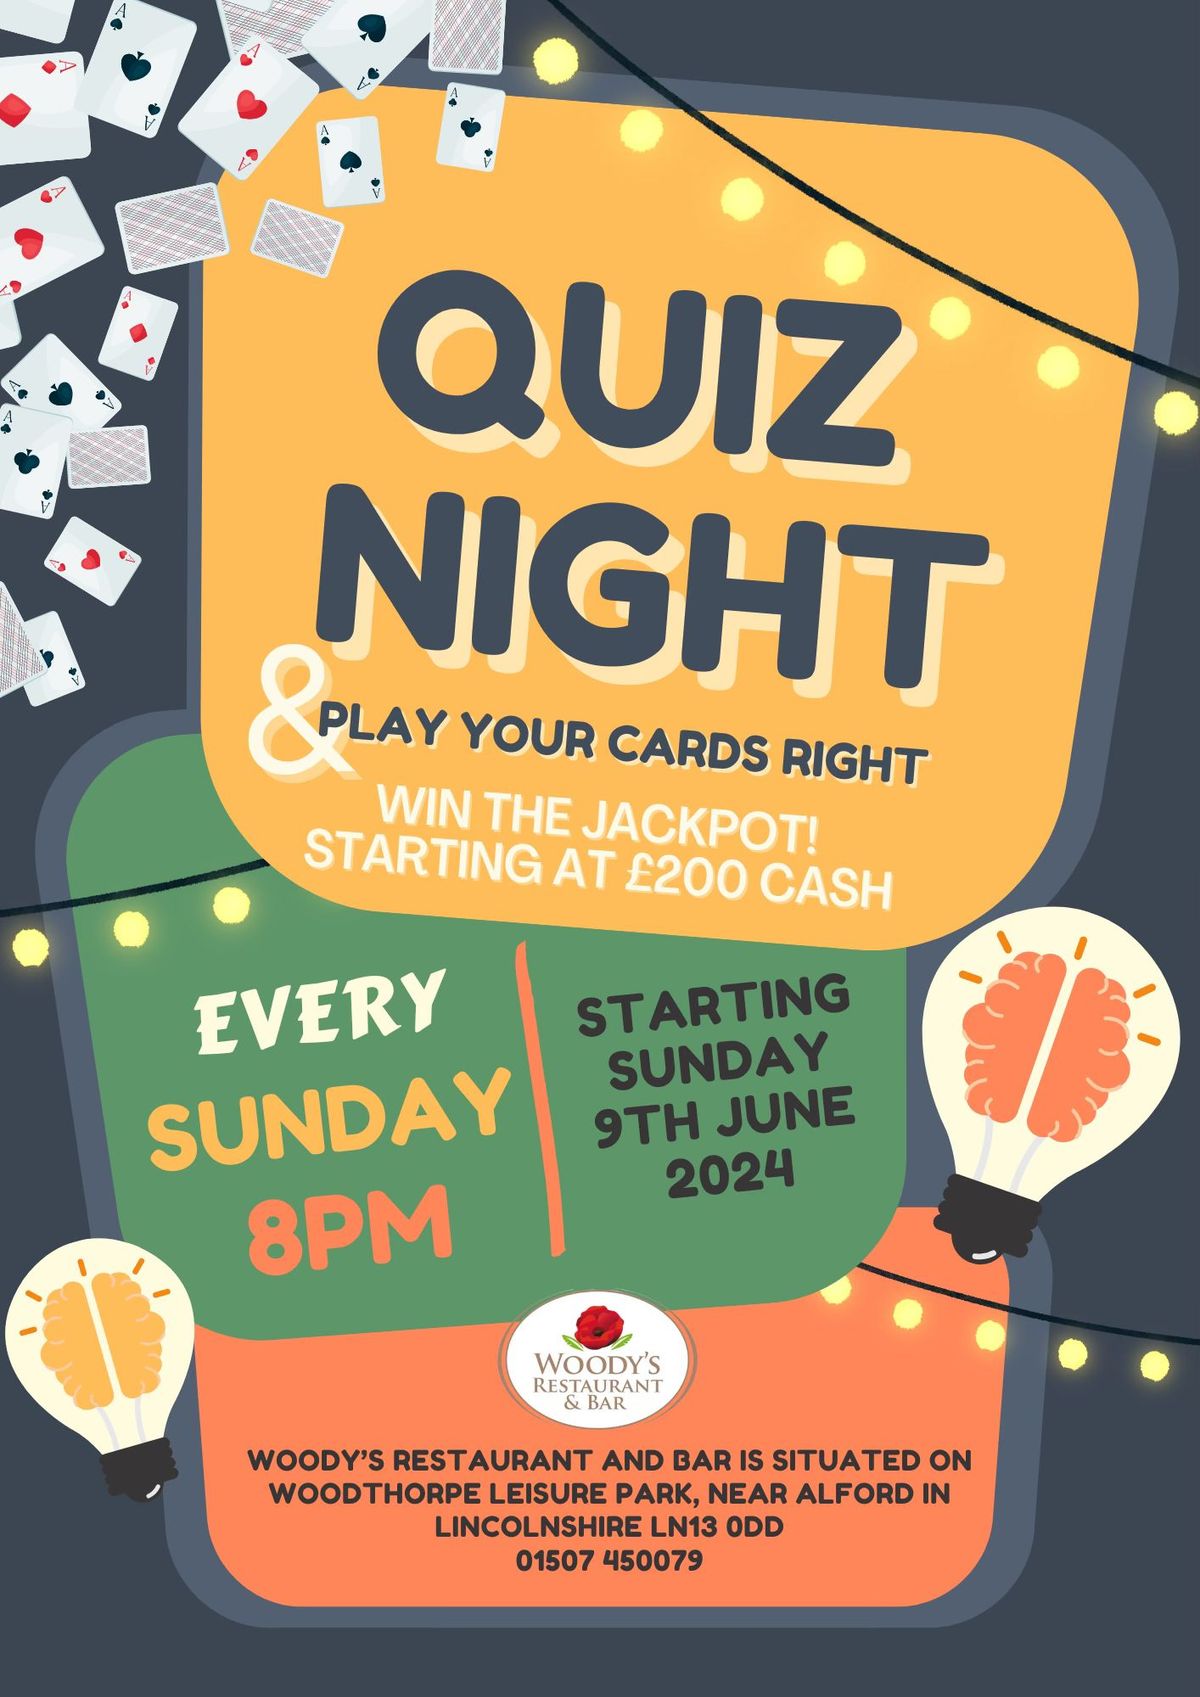 SUNDAY NIGHT QUIZ & Play Your Cards Right